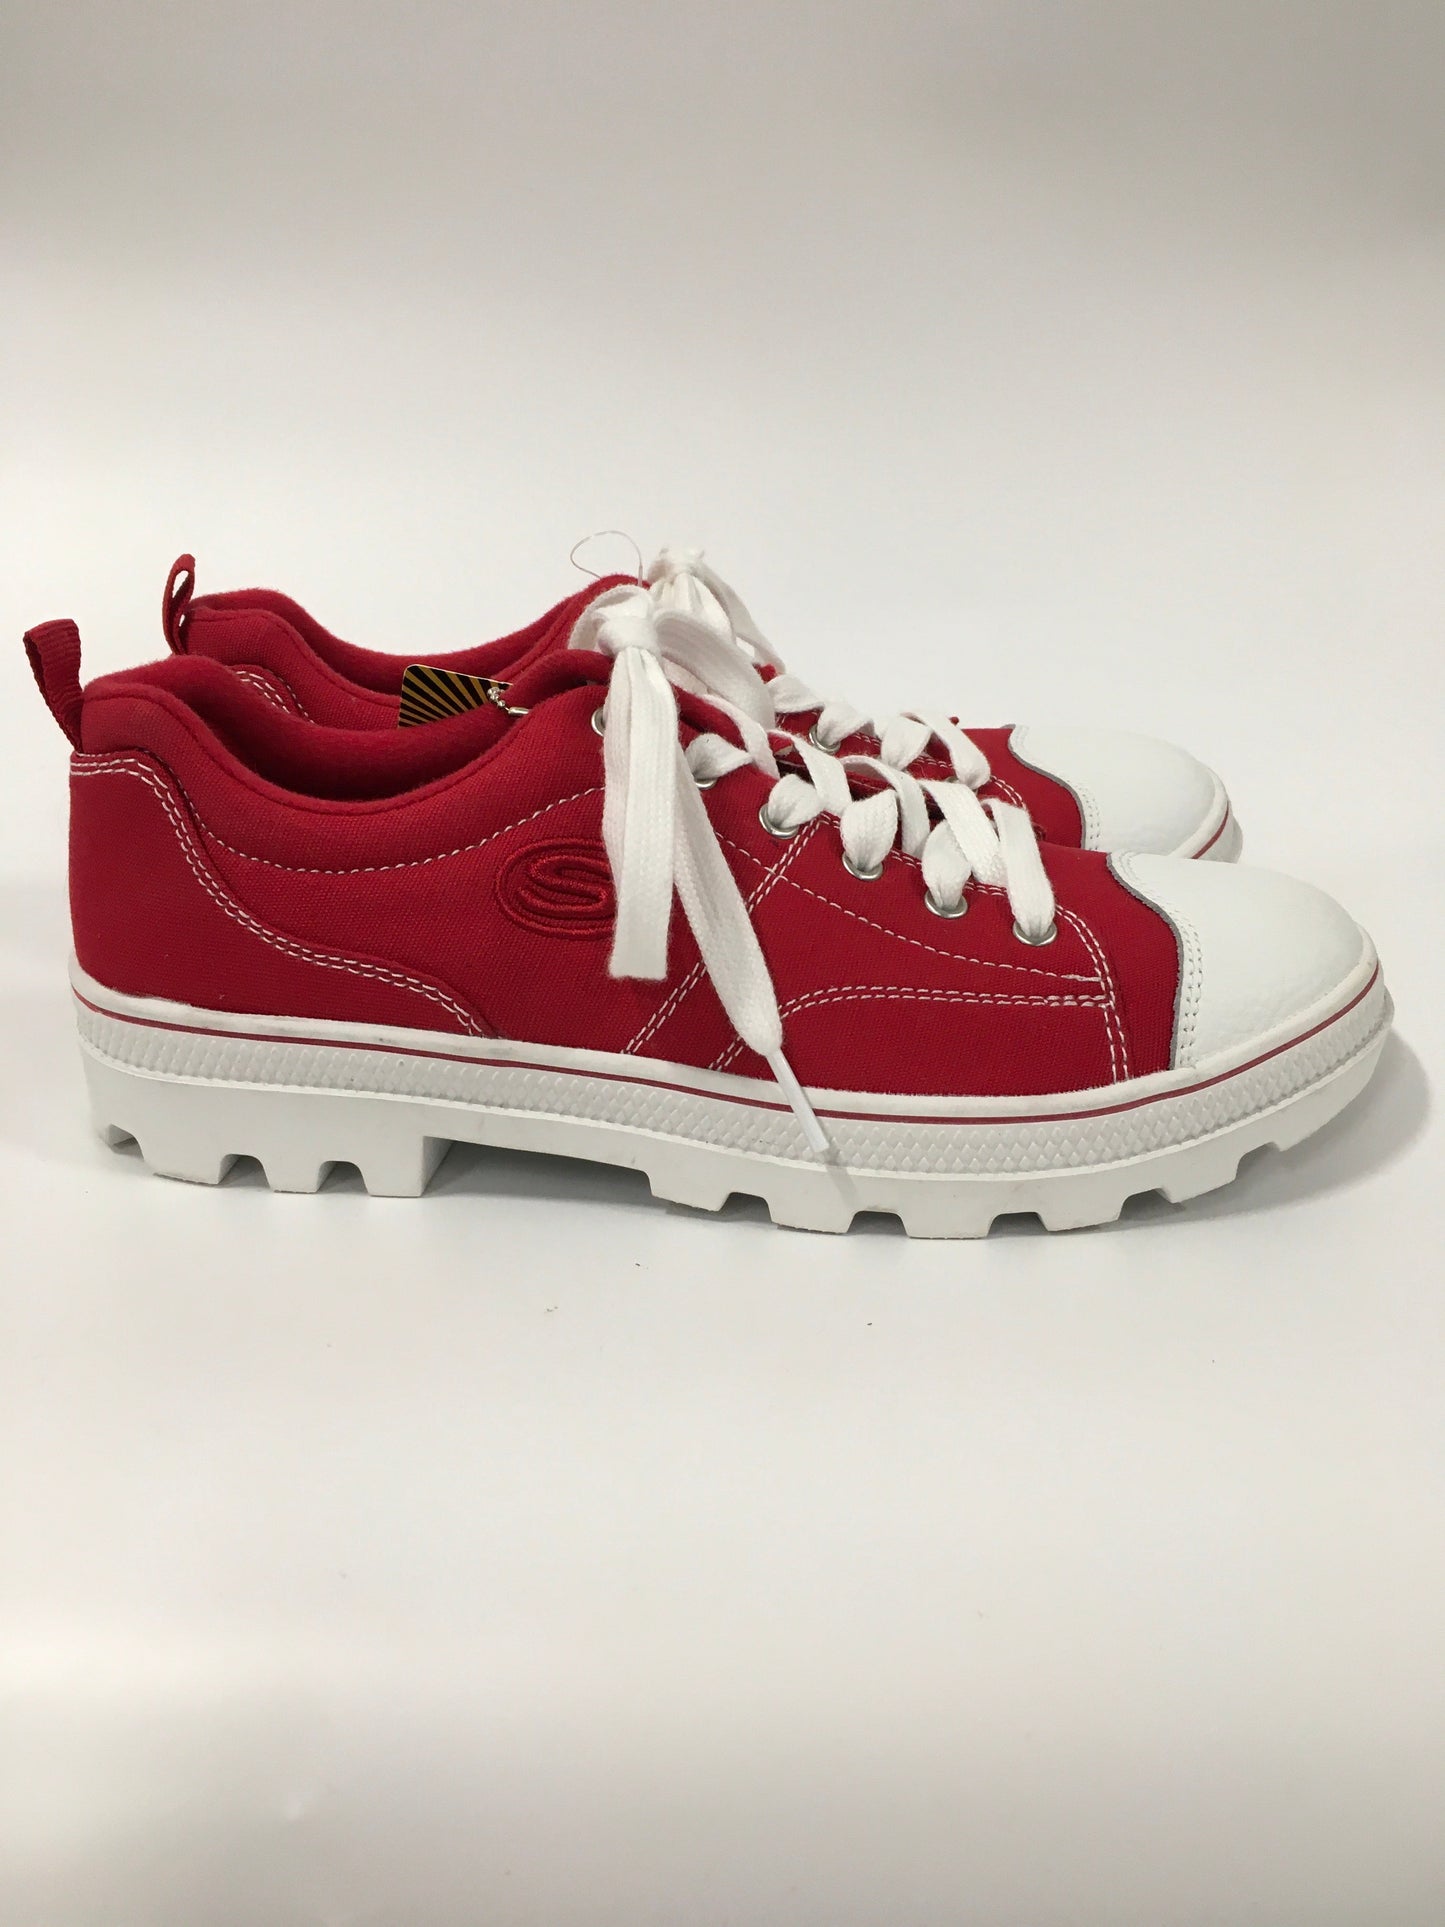 Red Shoes Athletic Skechers, Size 8.5